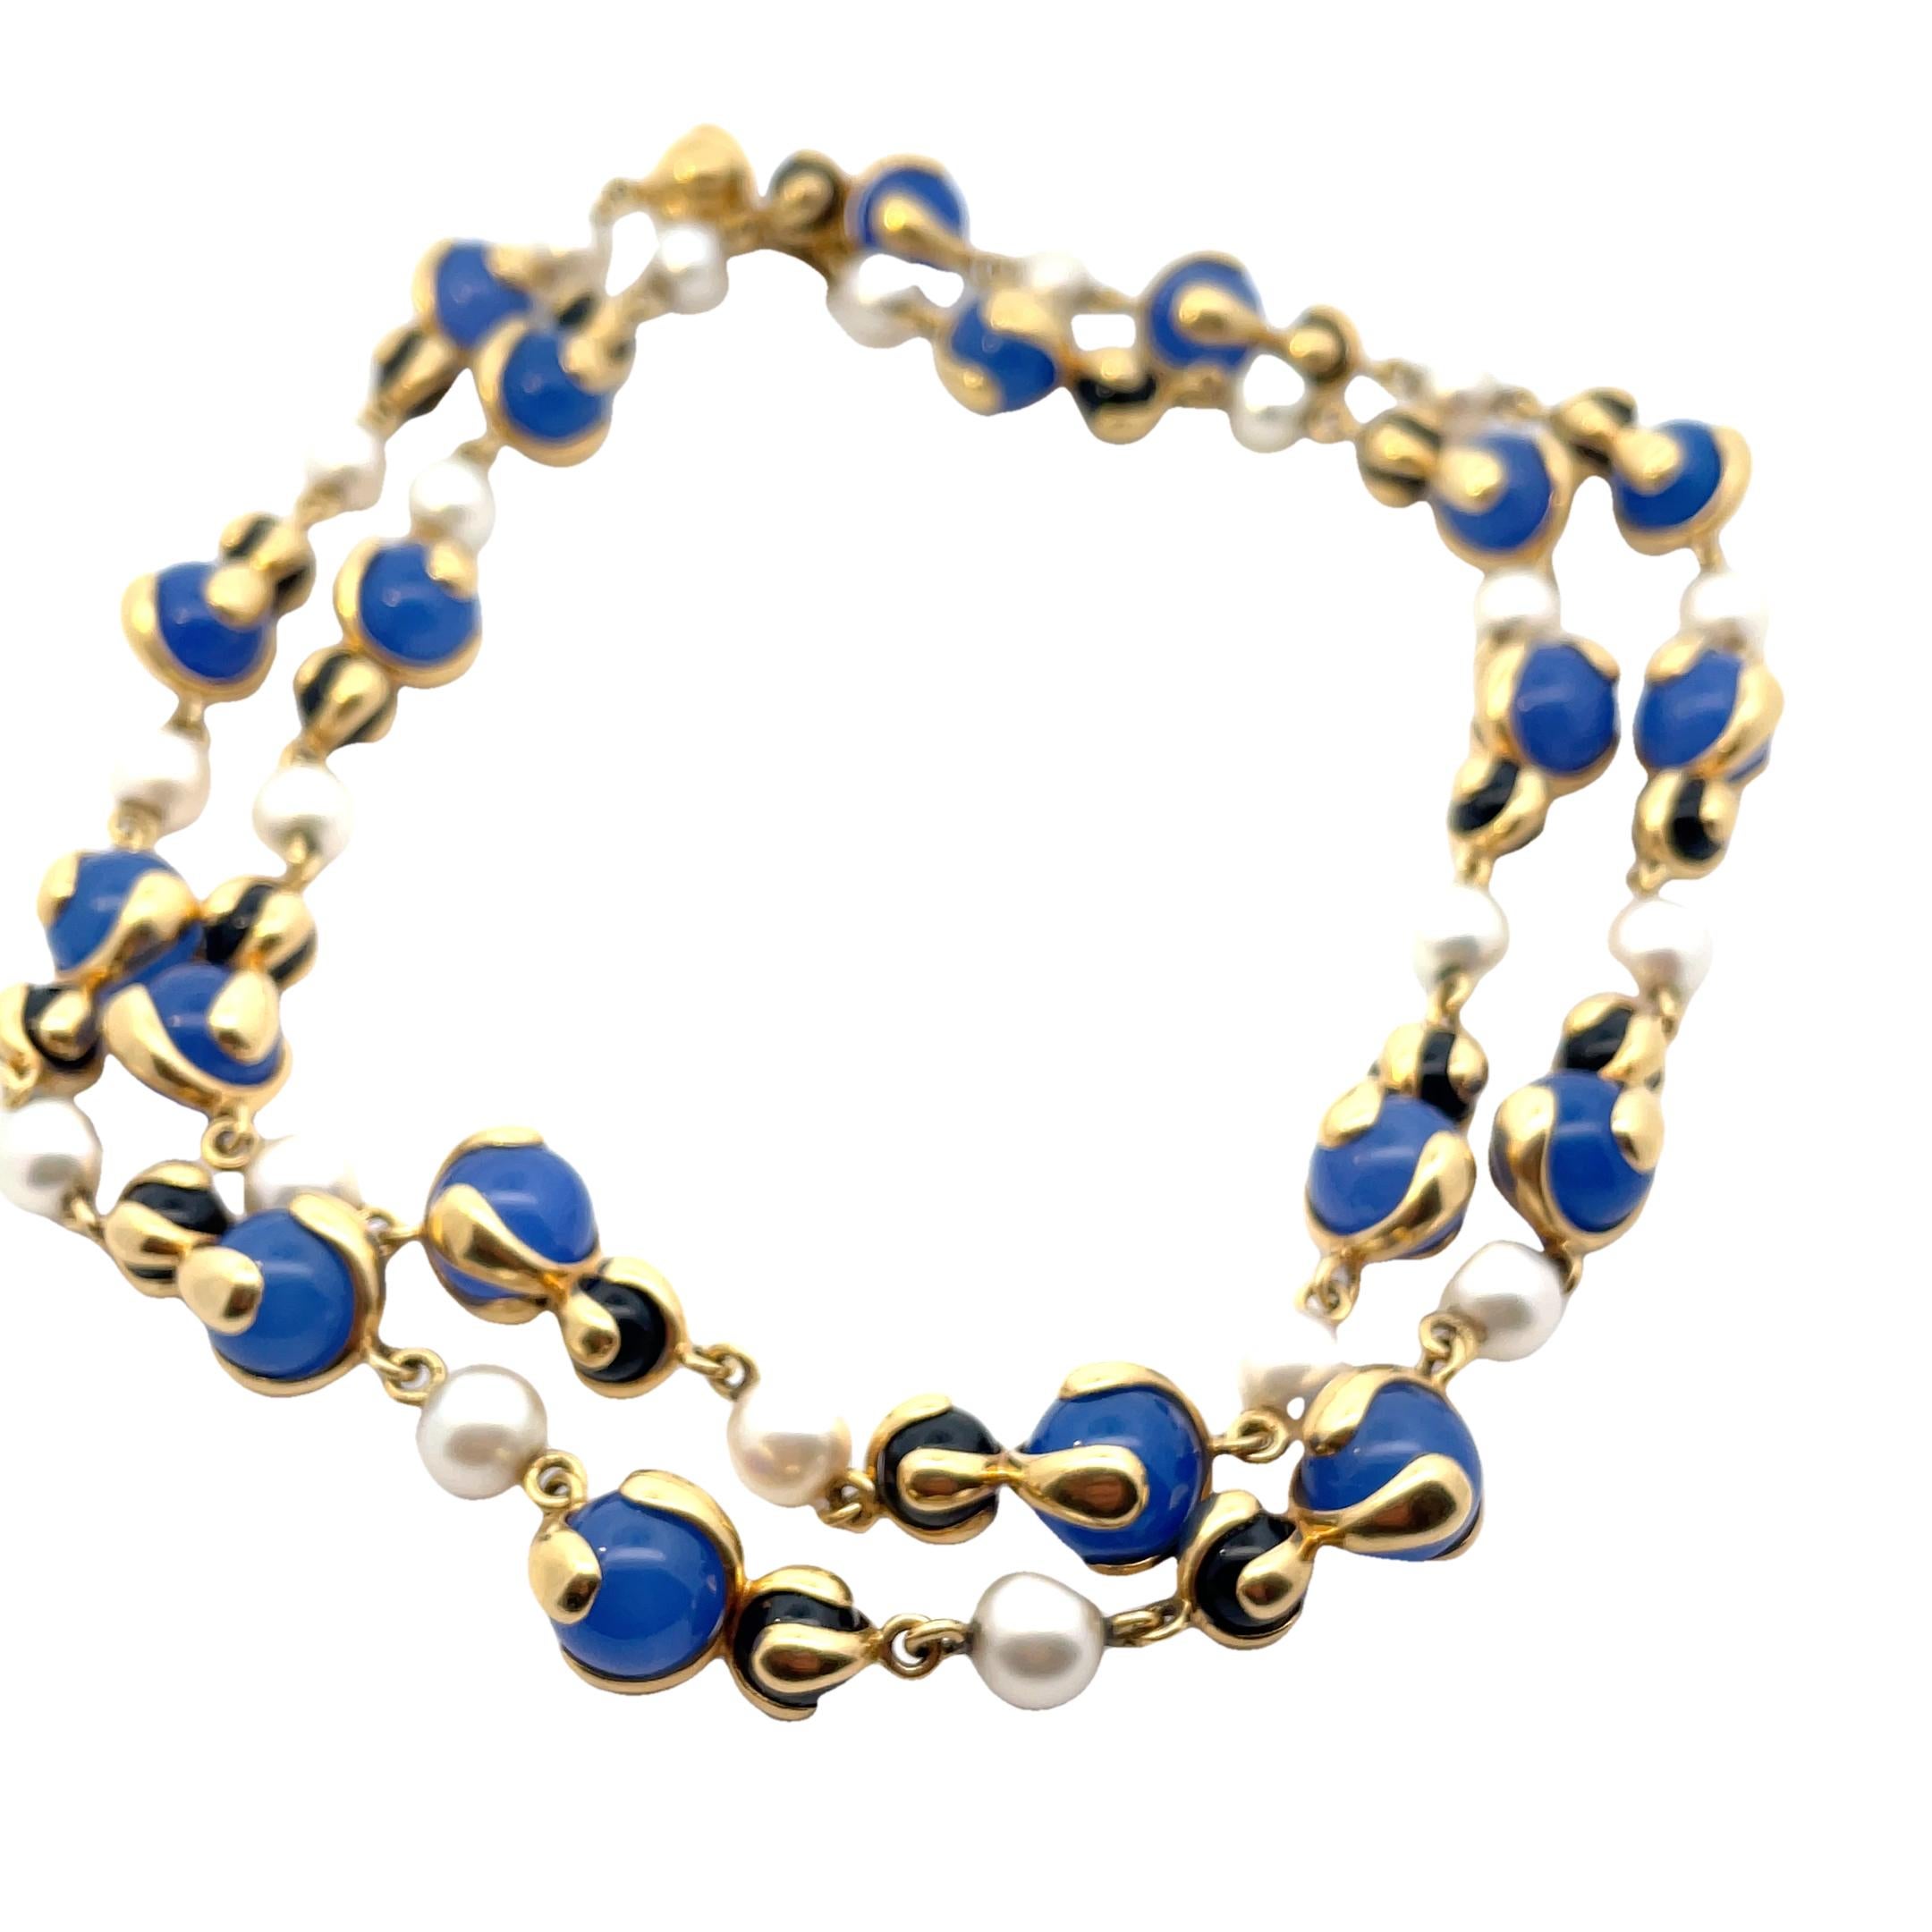 Vintage Long 18k gold necklace by Marina B, with 10.5 mm Blue Beads, 7mm onyx and 8mm pearls. Necklace is 84 cm long. Marked: Marina B, MB, Italy, 750. Weight - 131,5 grams.
Please note we have another one in Blue Beads and can be purchase togheter.
